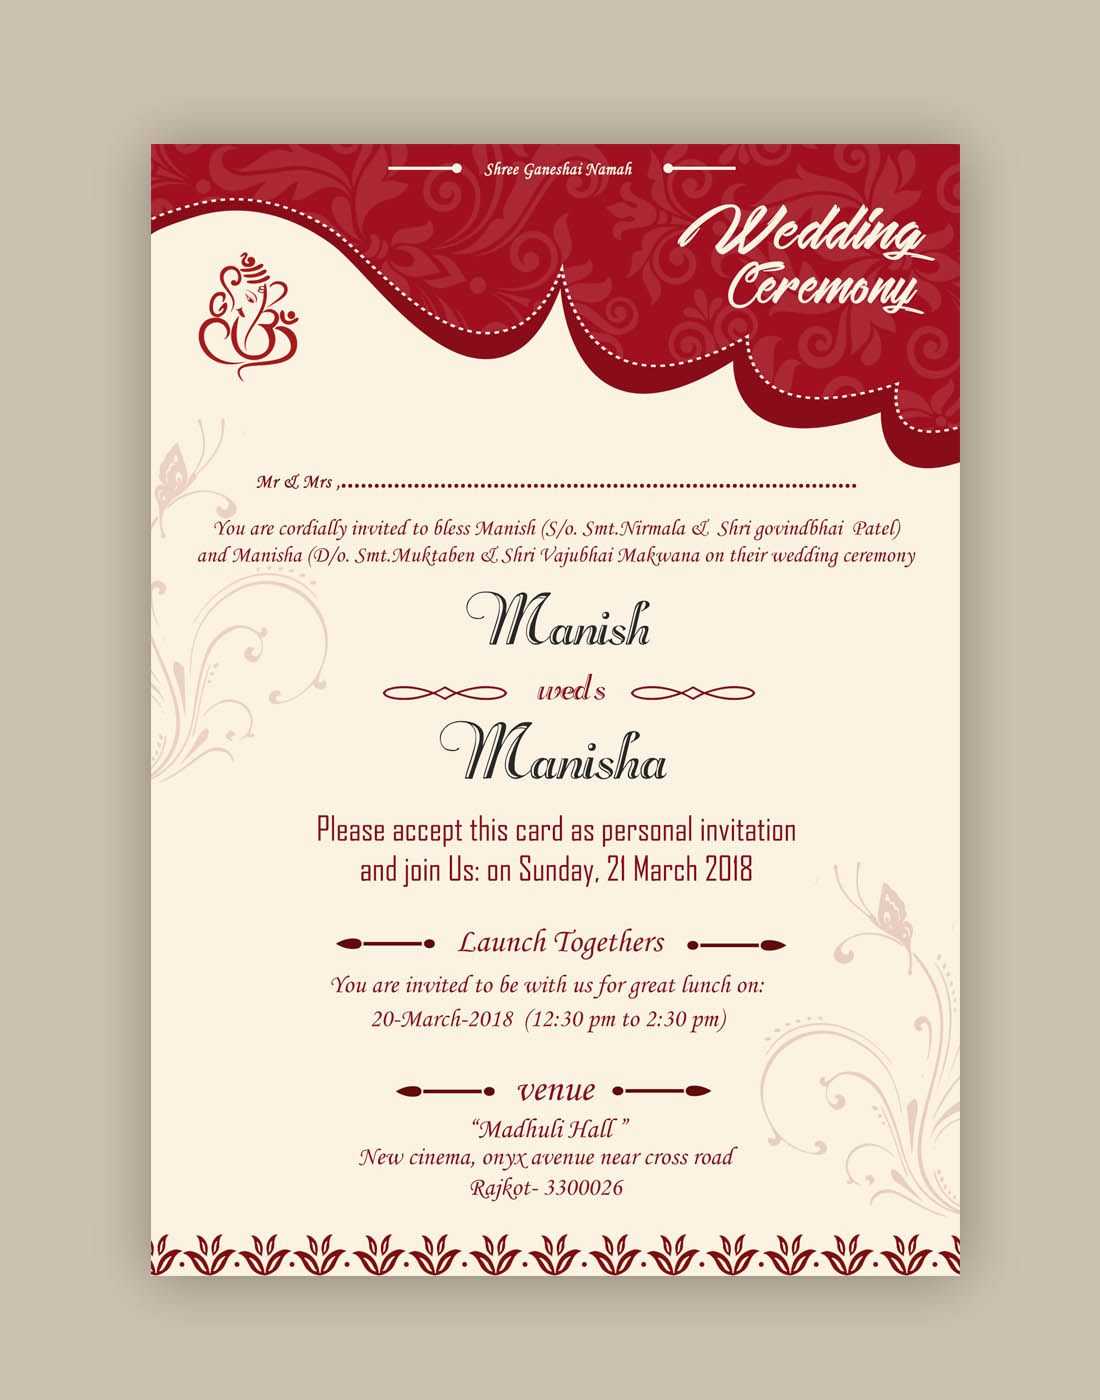 Free Wedding Card Psd Templates In 2019 | Free Wedding Cards Throughout Free E Wedding Invitation Card Templates